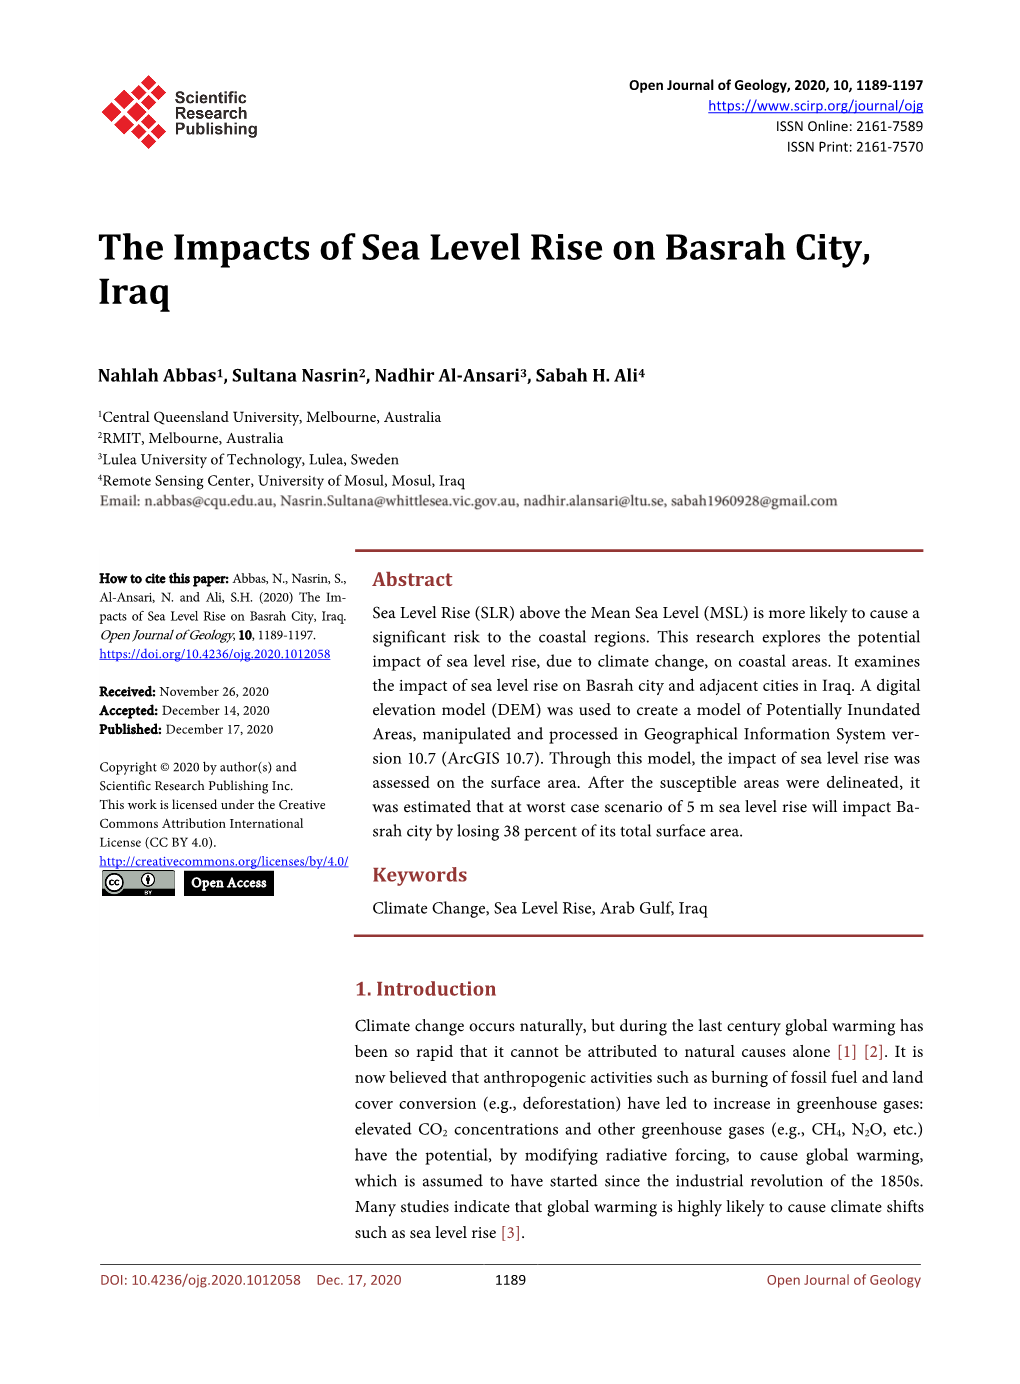 The Impacts of Sea Level Rise on Basrah City, Iraq